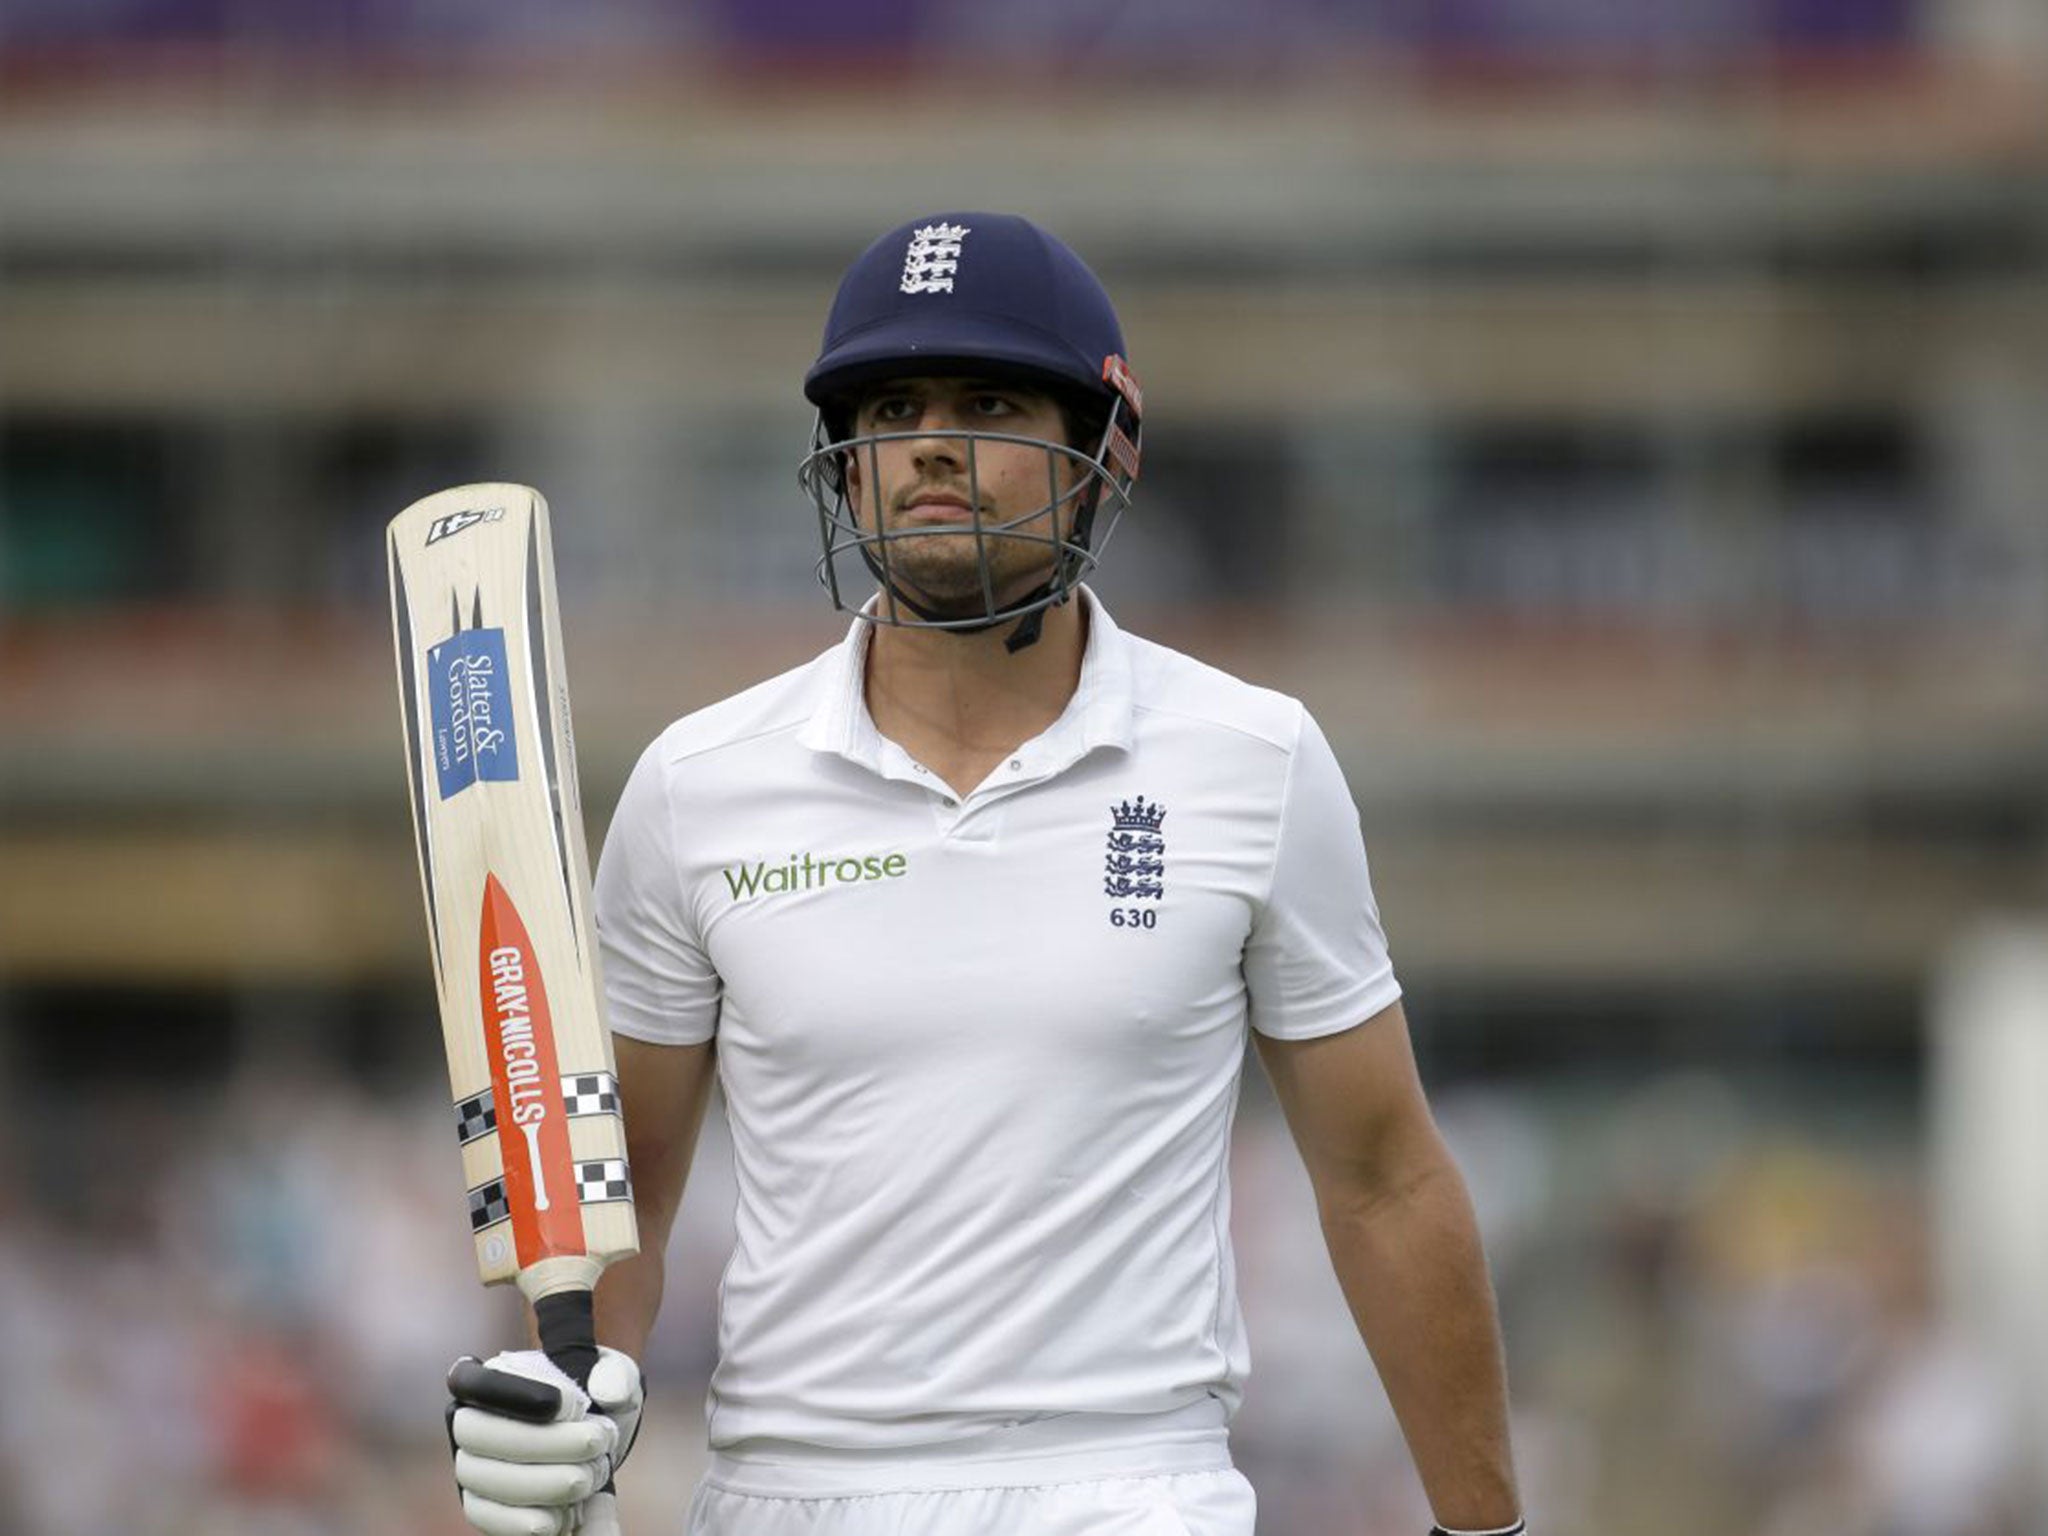 Alastair Cook, England's Test captain, is just shy of 10,000 Test runs